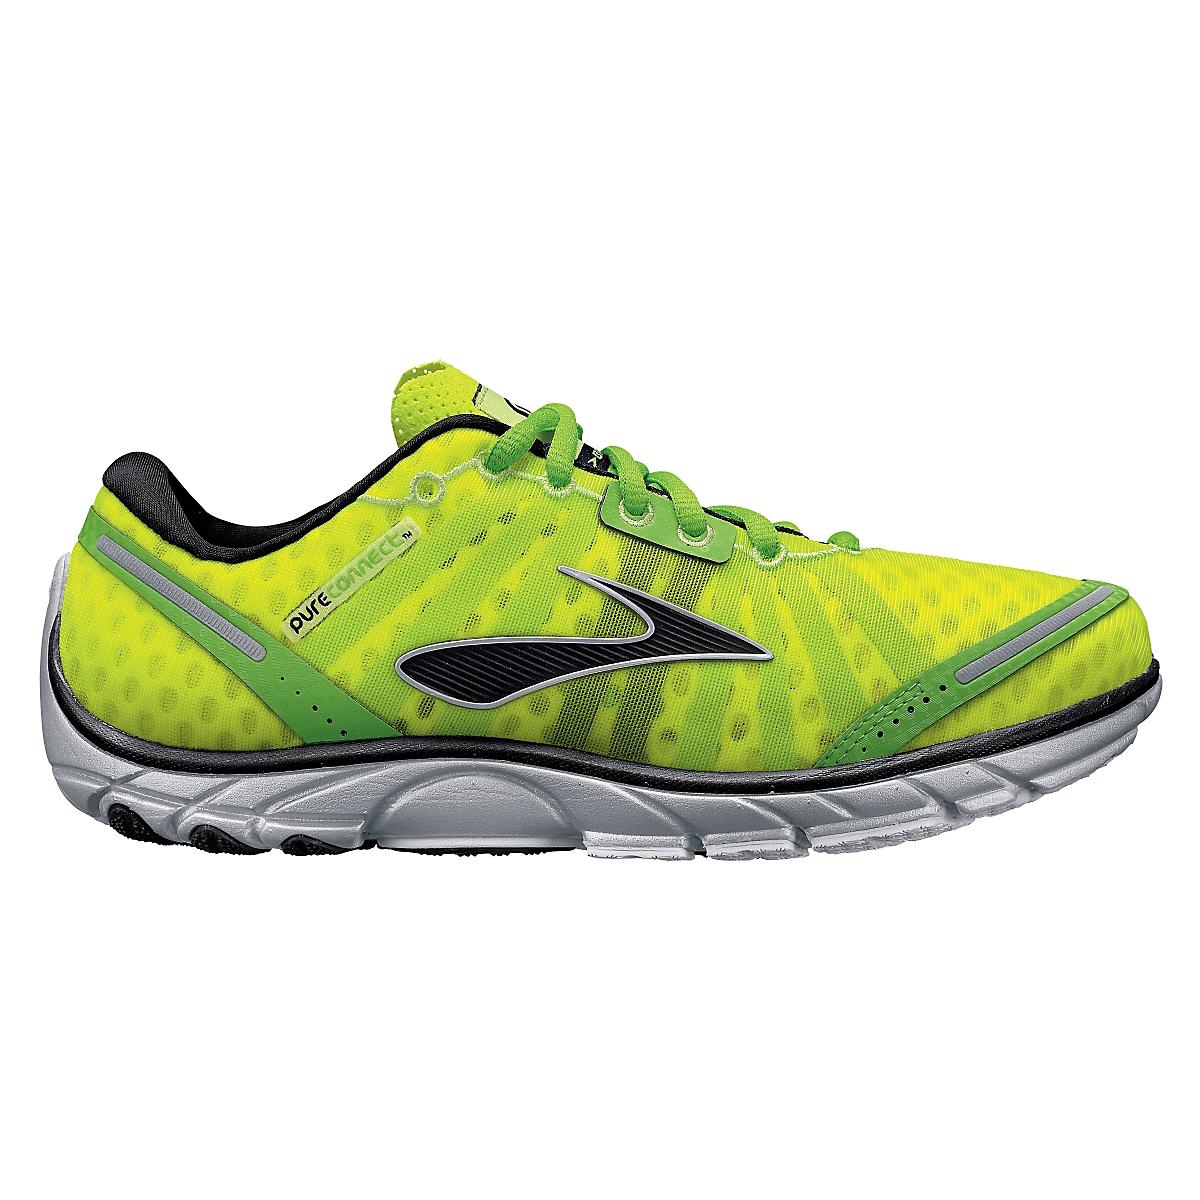 Womens Brooks PureConnect Running Shoe at Road Runner Sports